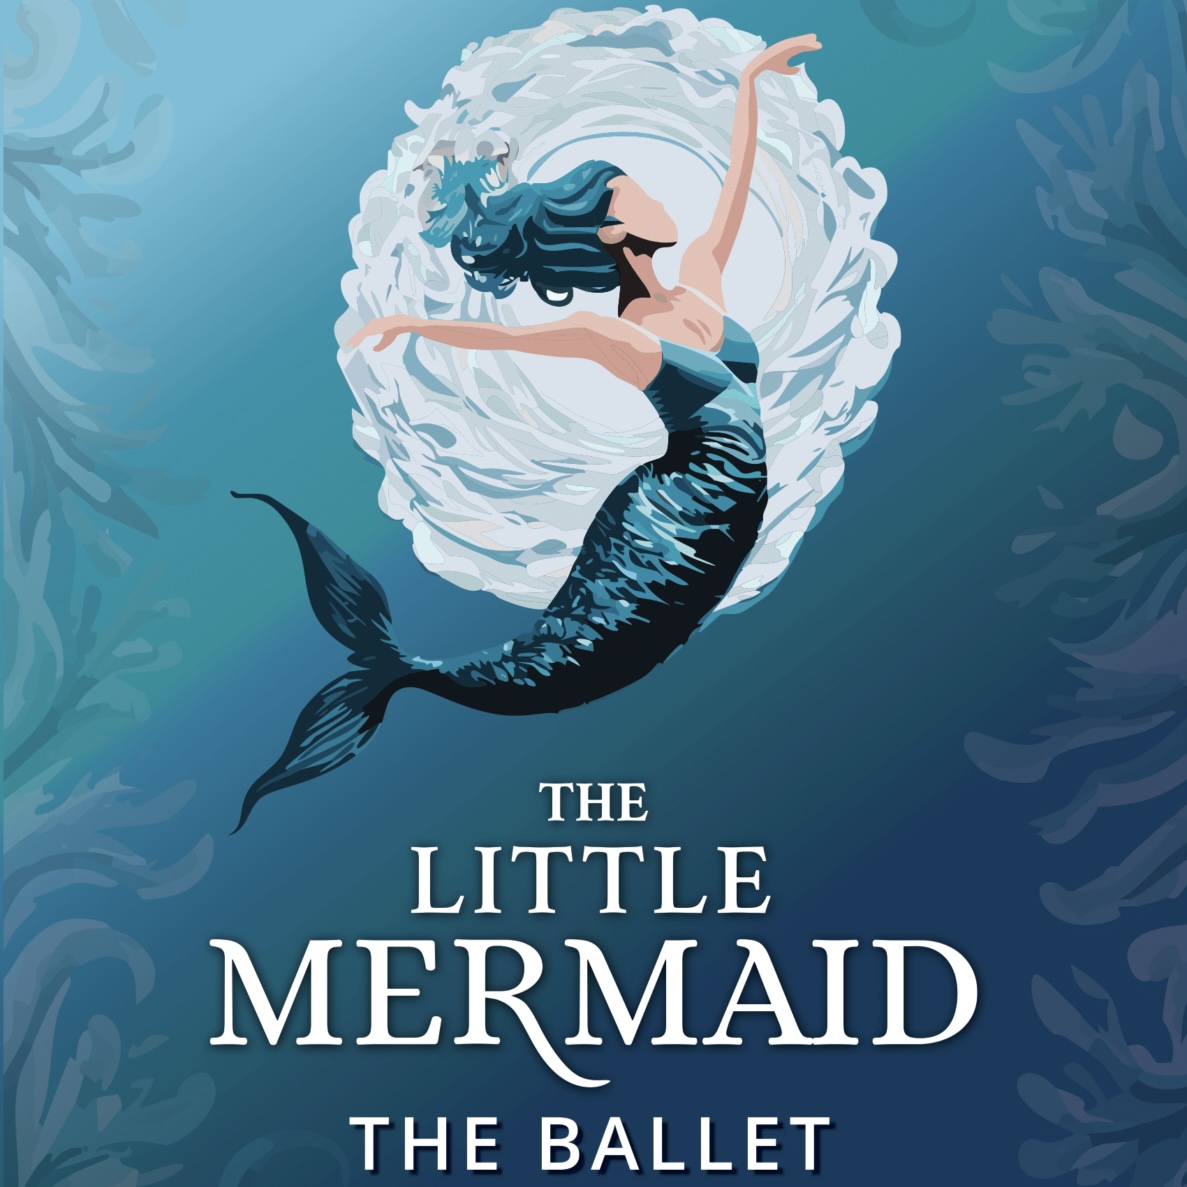 The Little Mermaid The Ballet poster features an animated mermaid surrounded water. 